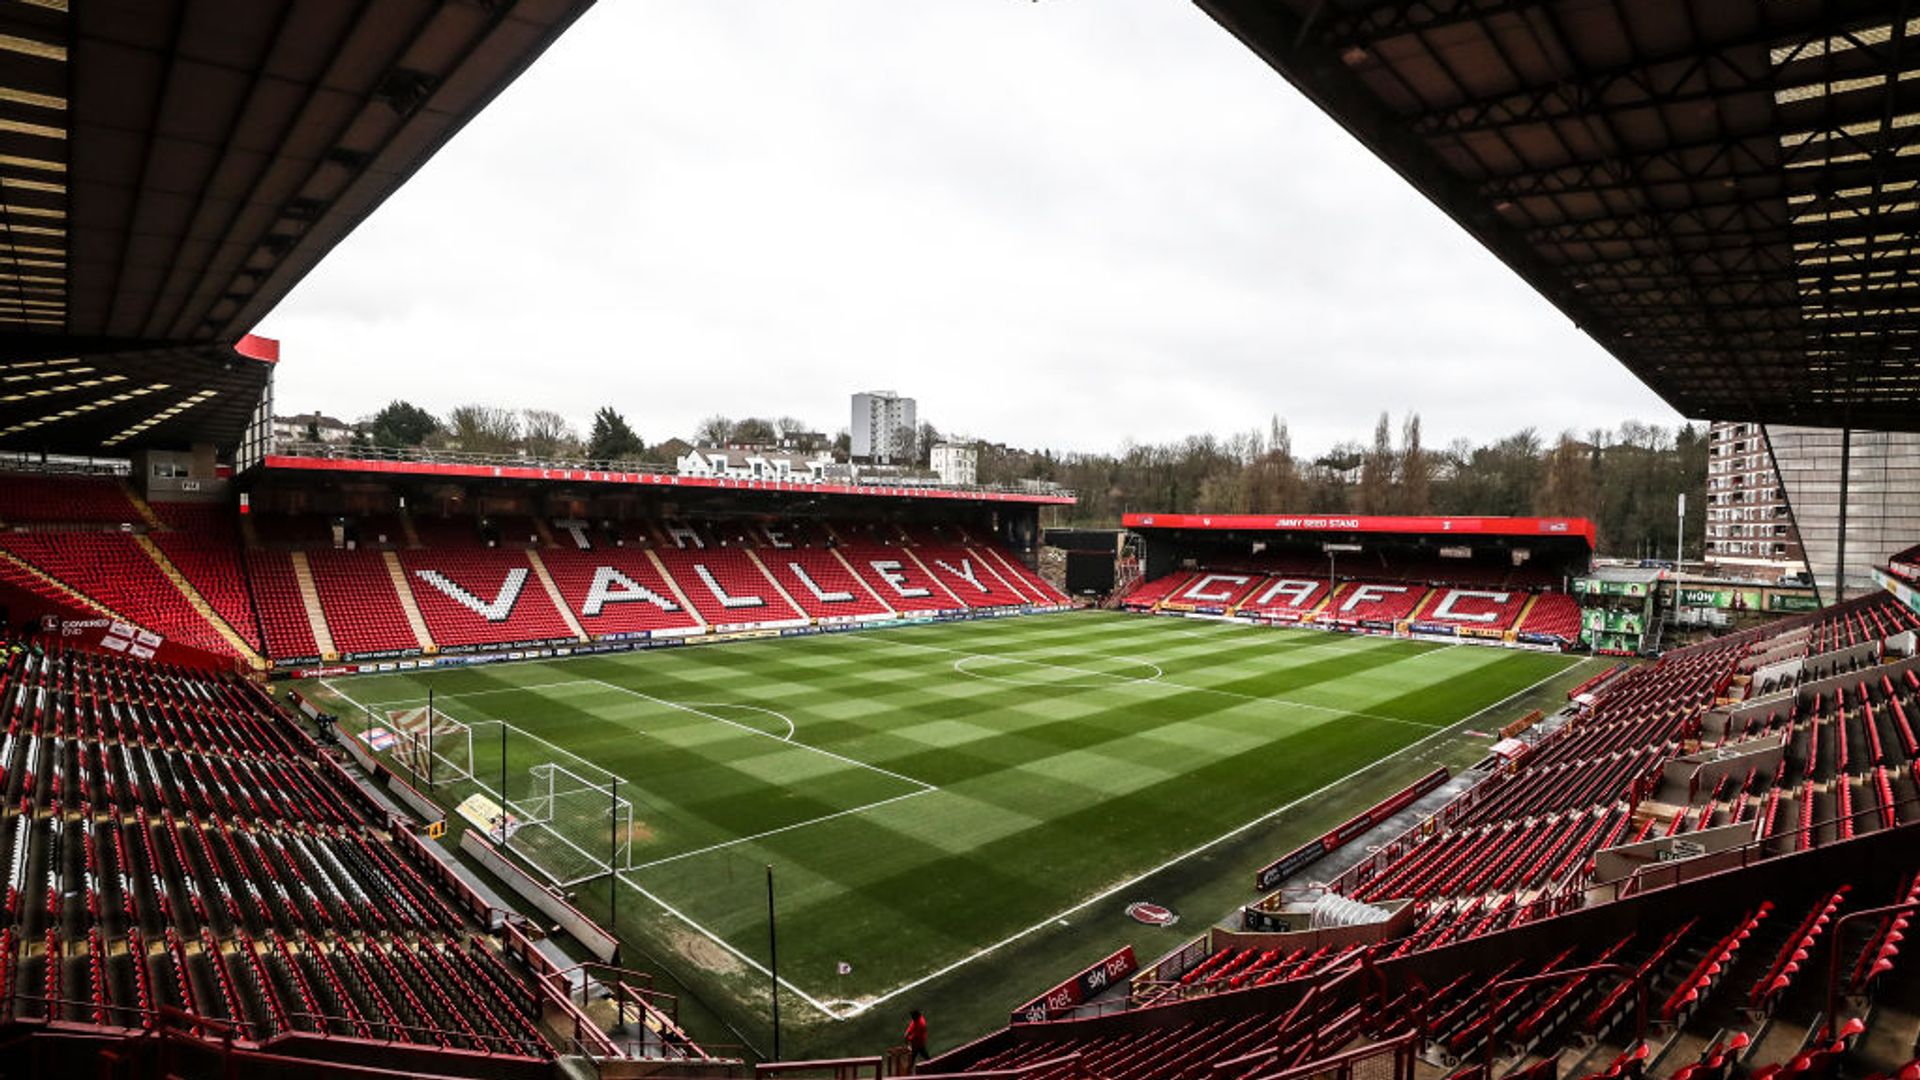 Charlton fans occupy boardroom in ownership protest